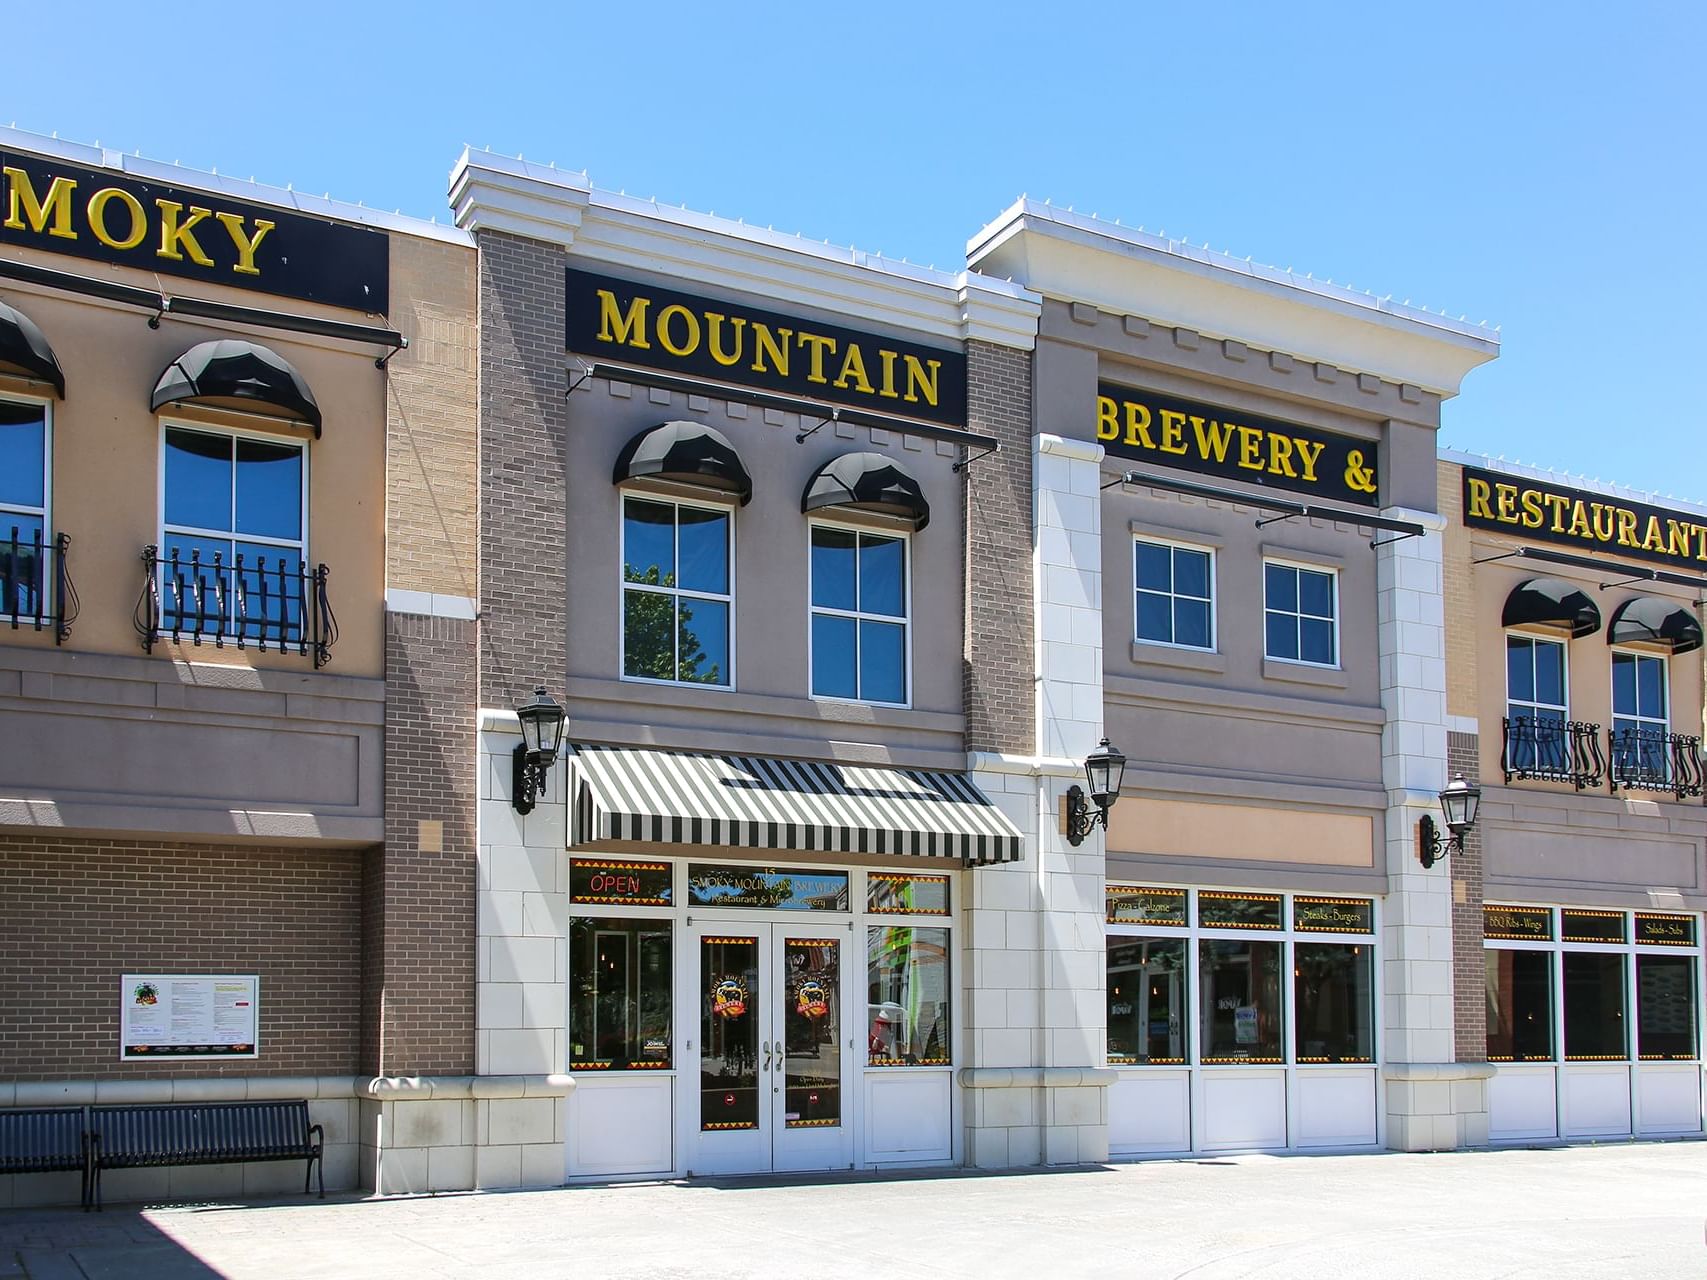 The Smoky Mountain Brewery and Restaurant in Pigeon Forge, TN